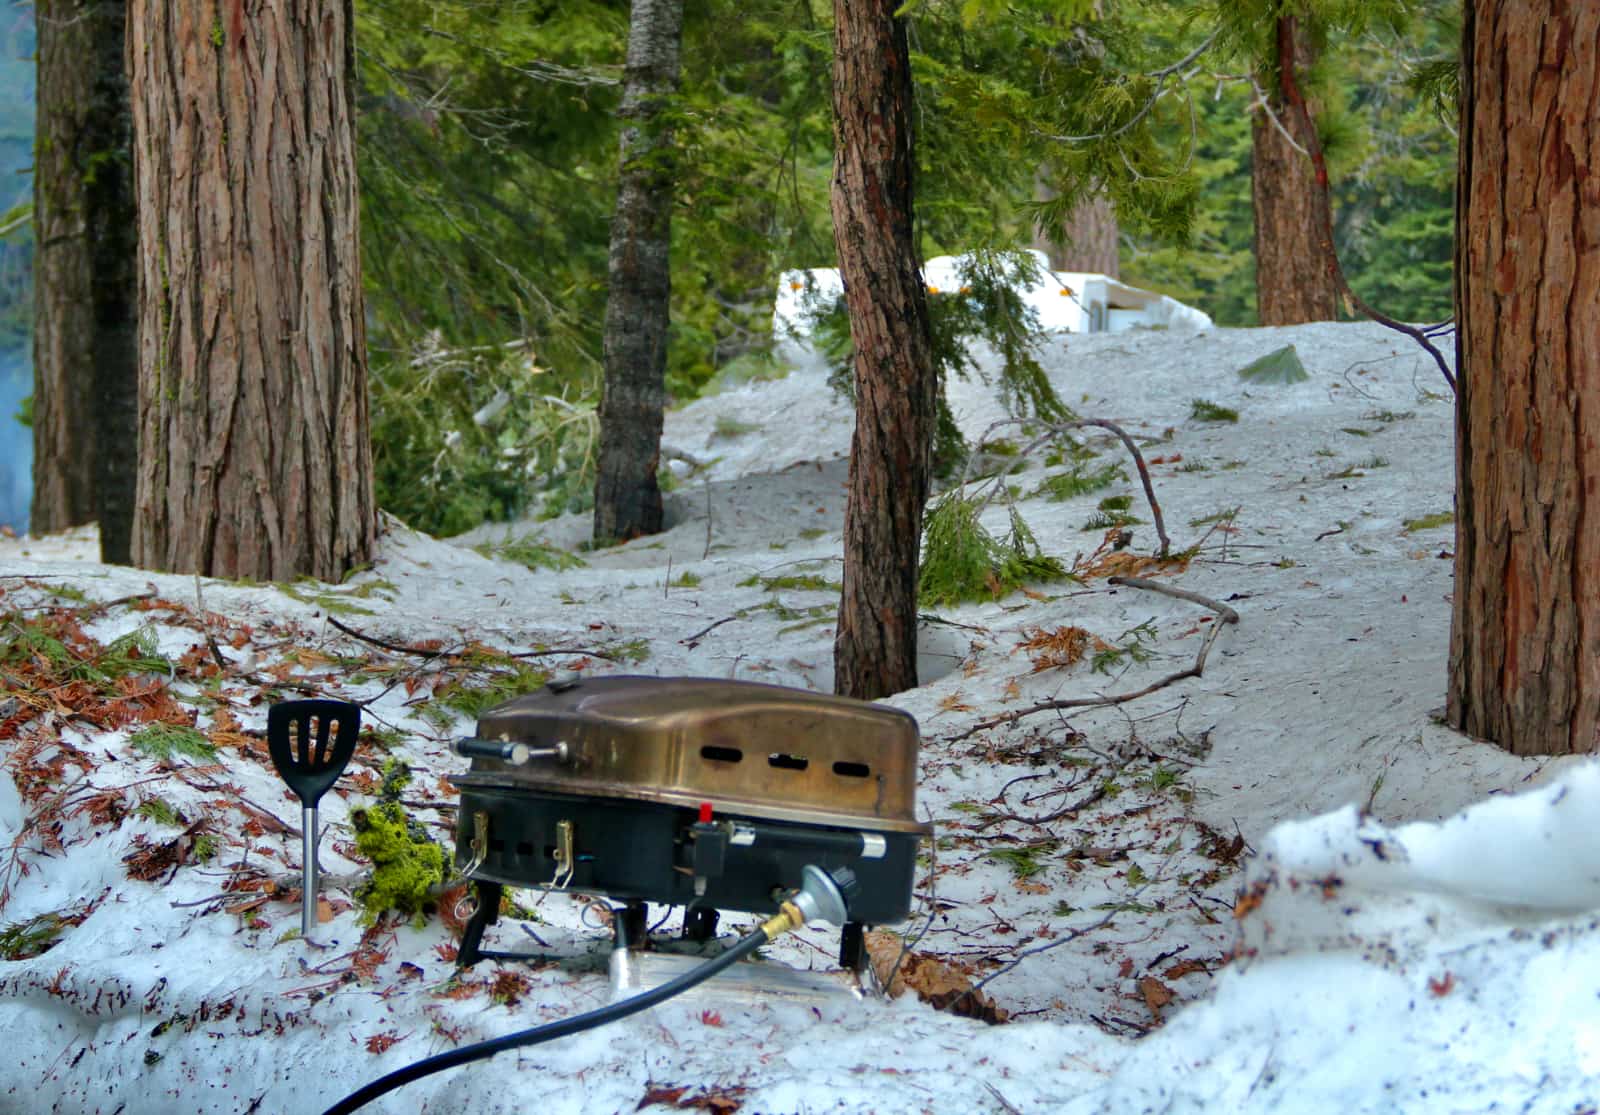 Small camp stove sitting on snow covered ground